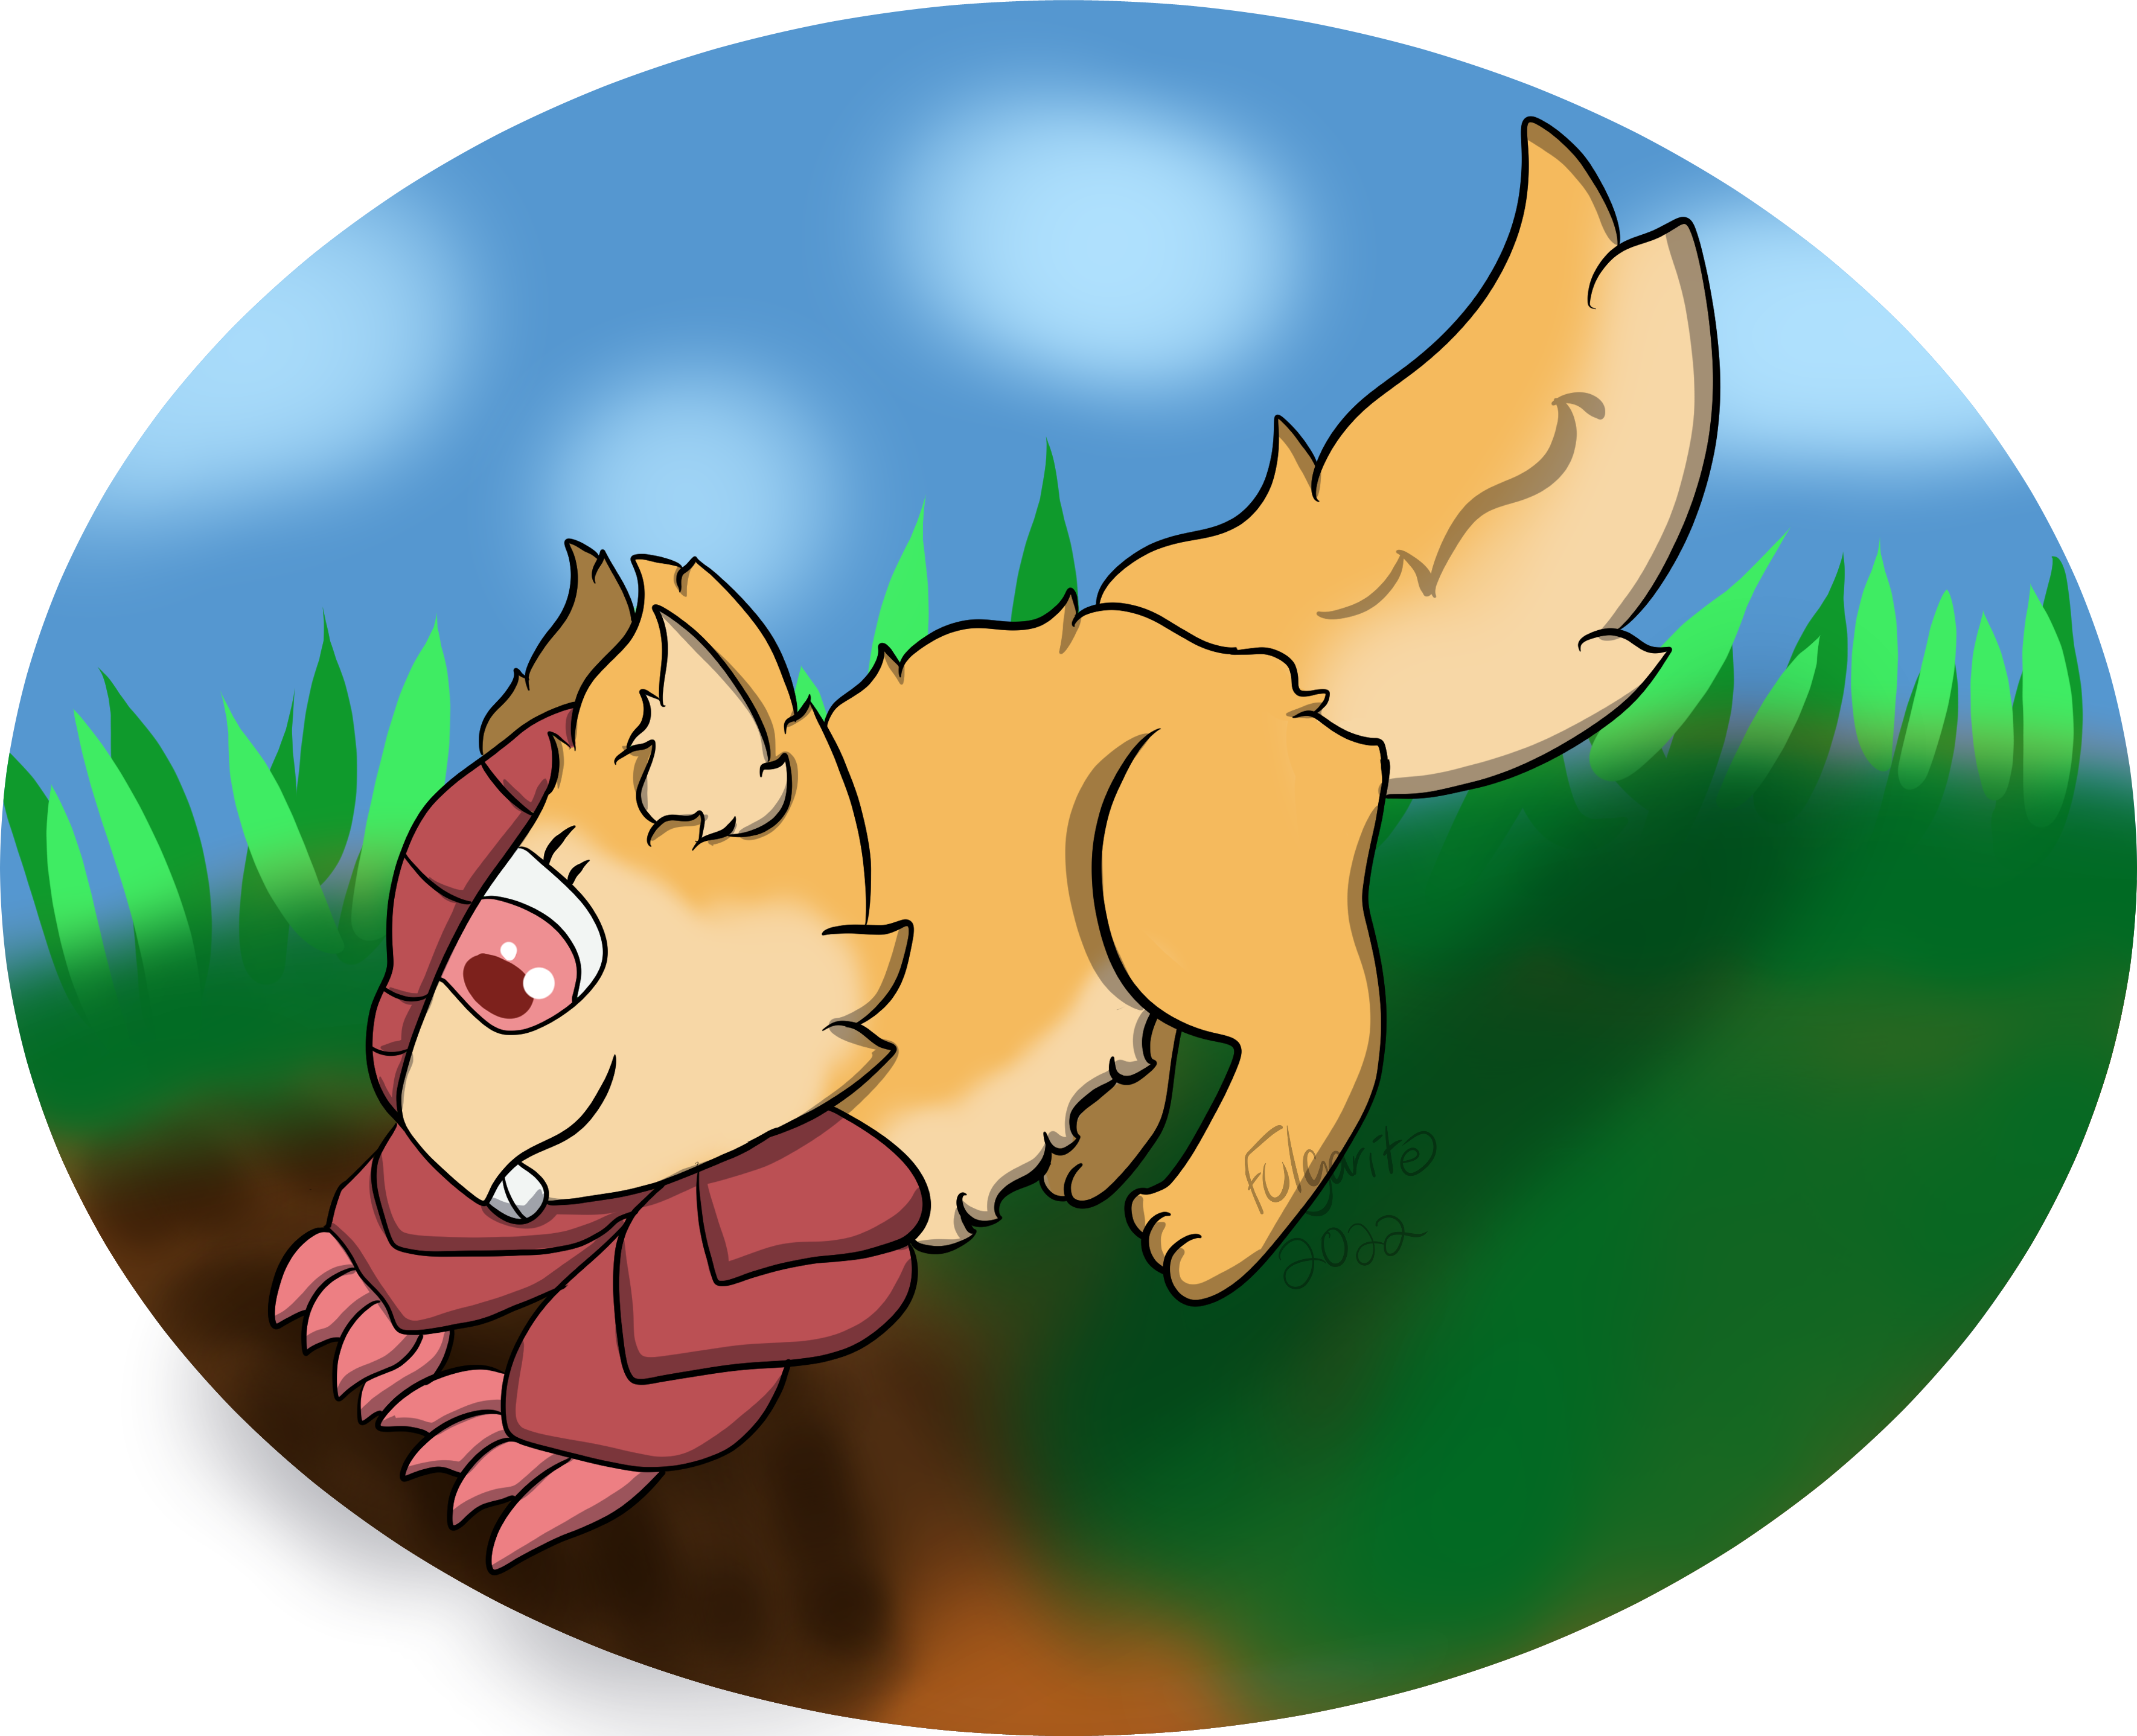 [Gift] Digging a hole